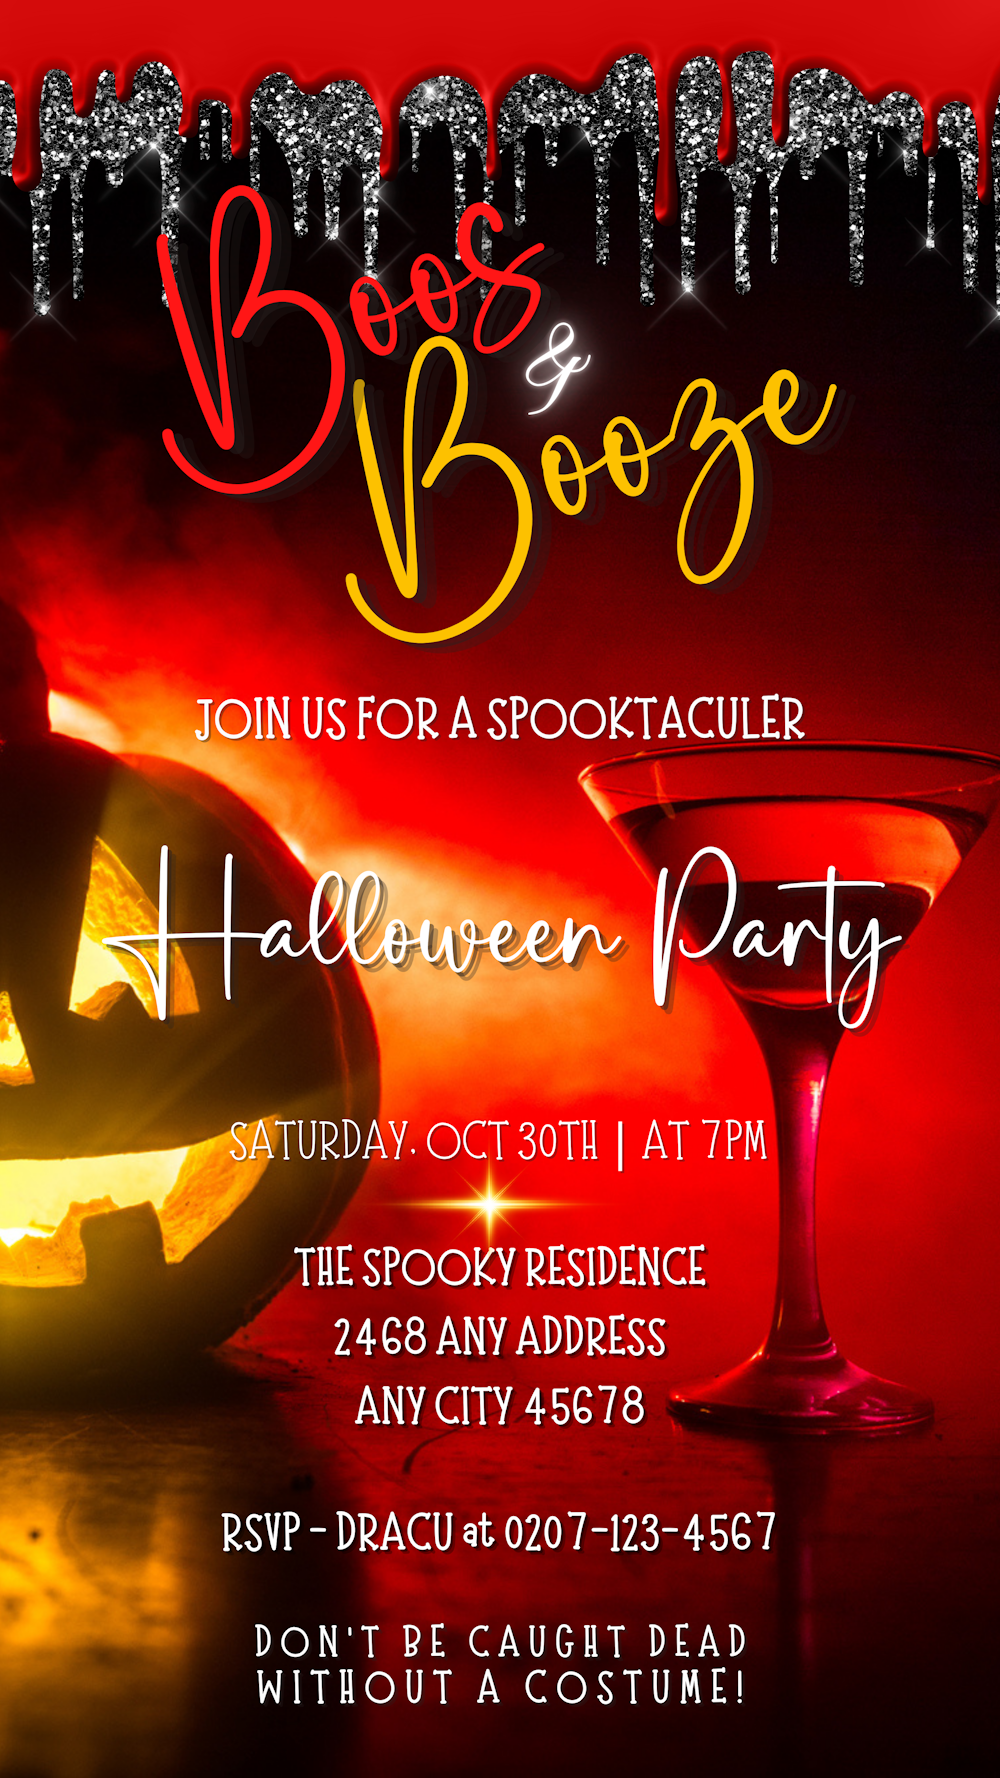 BOOS & BOOZE RED HOT PUMPKIN | HALLOWEEN EVITE featuring a carved pumpkin and a martini glass, with customizable text for invitations via Canva.